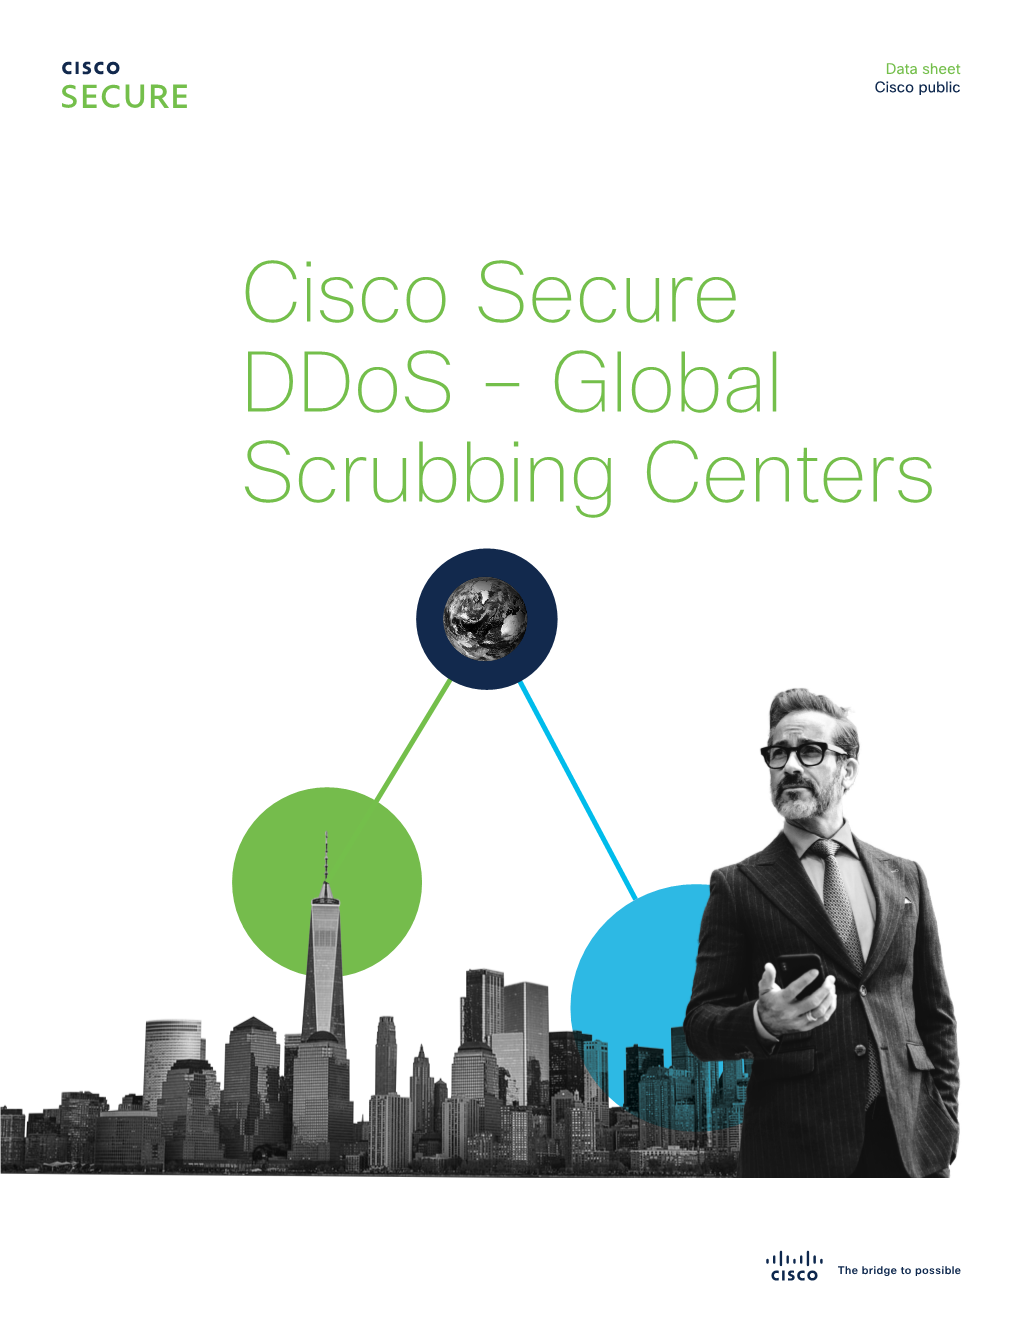 Cisco Secure Ddos Protection: Global Scrubbing Centers Data Sheet